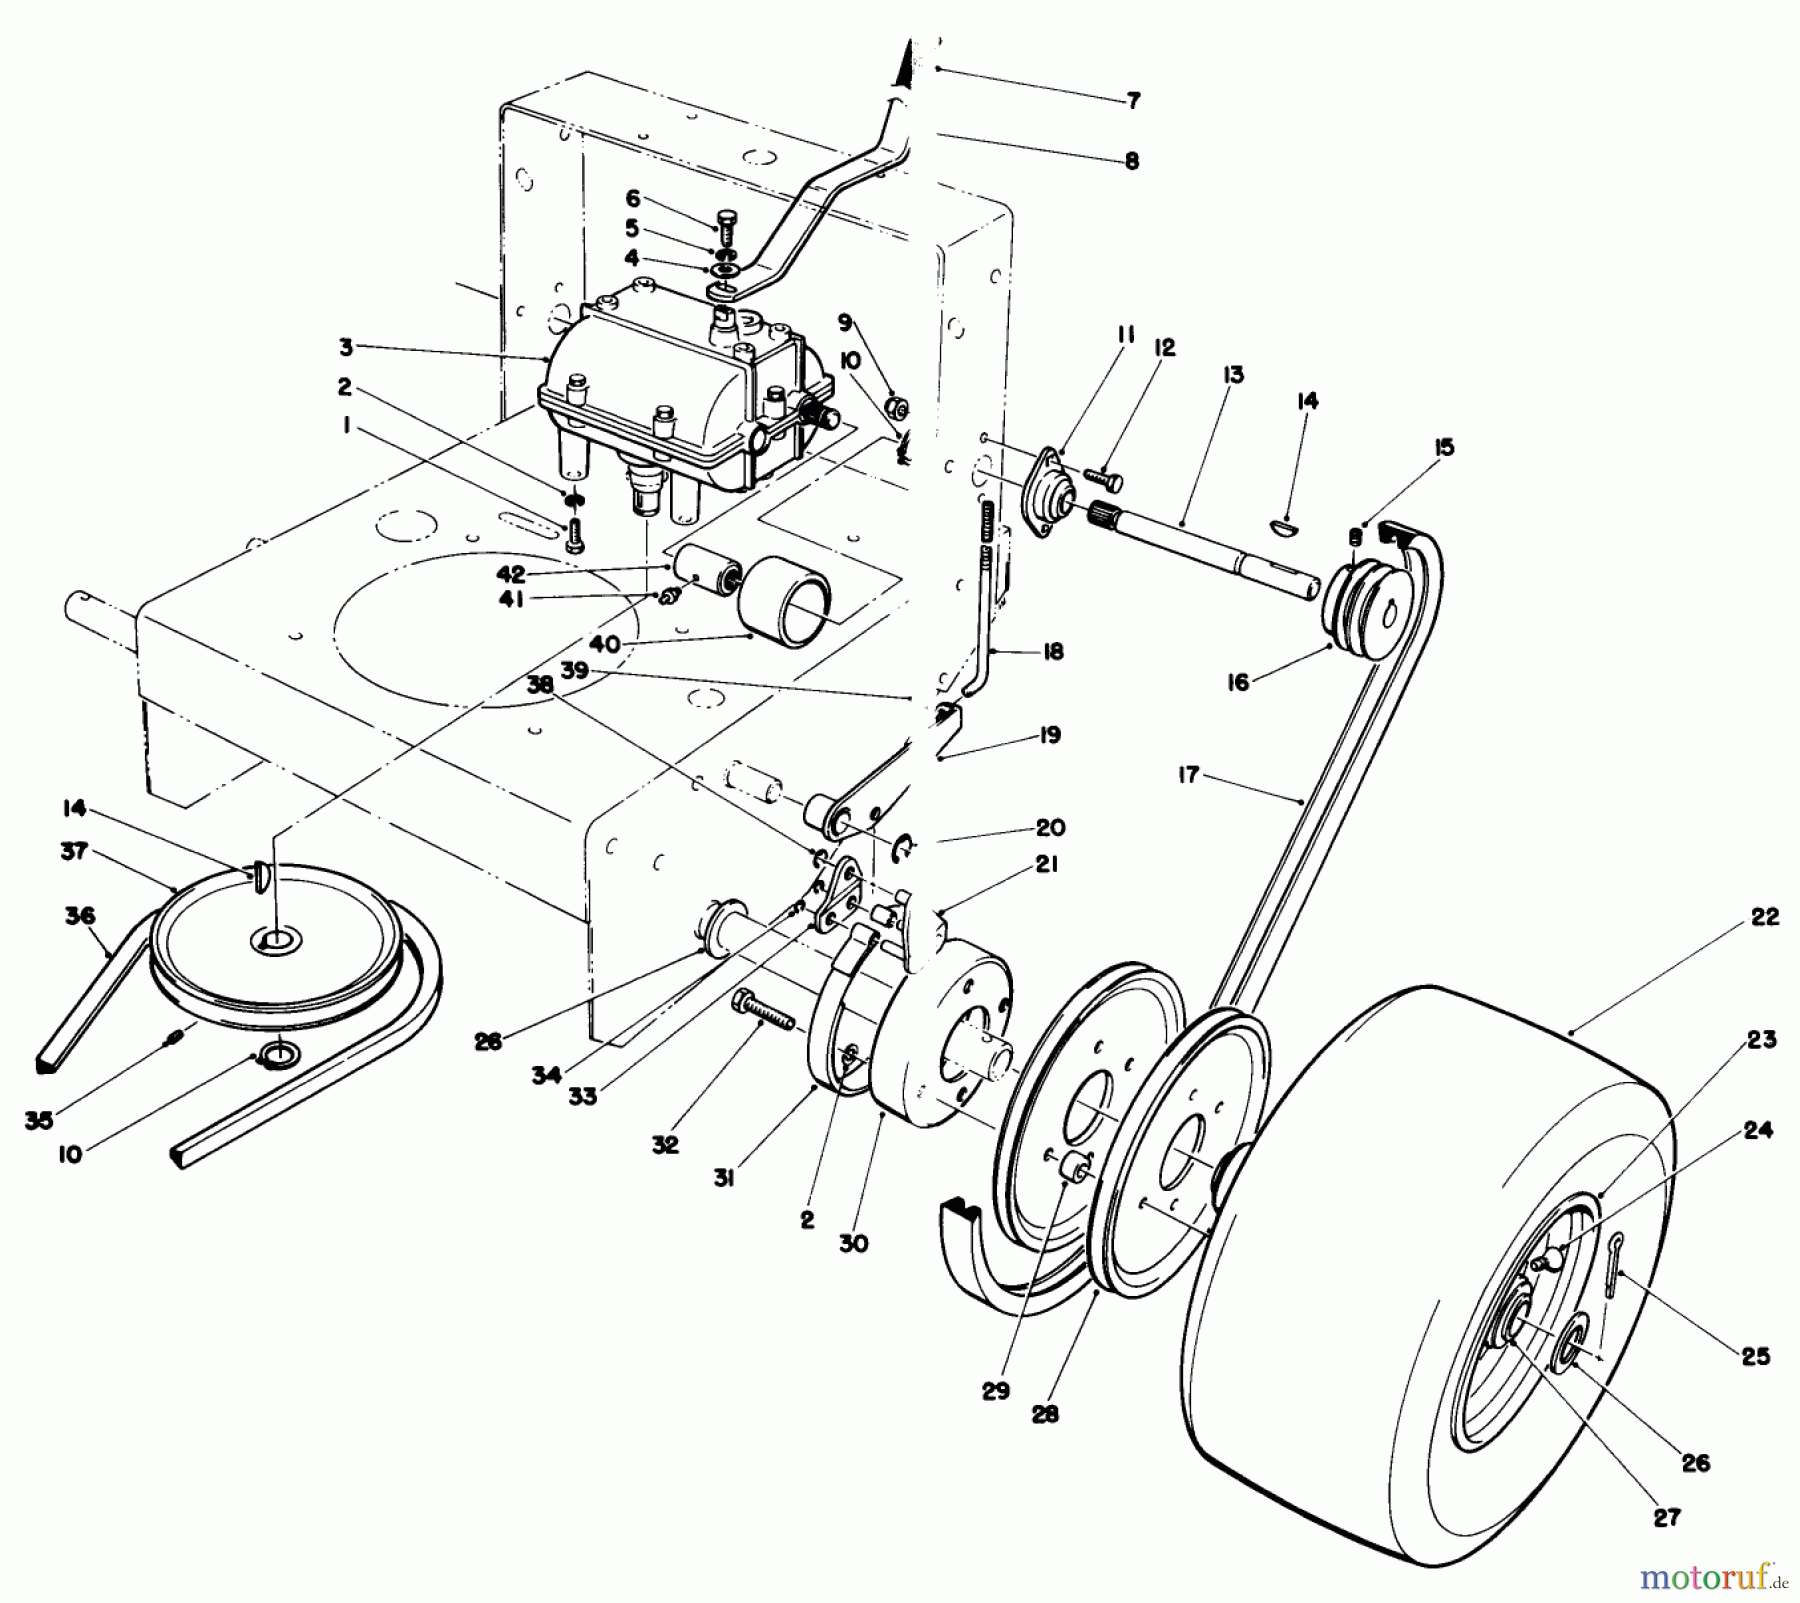  Toro Neu Mowers, Drive Unit Only 30113 - Toro Mid-Size Proline Gear Traction Unit, 8 hp, 1986 (6000001-6999999) AXLE ASSEMBLY